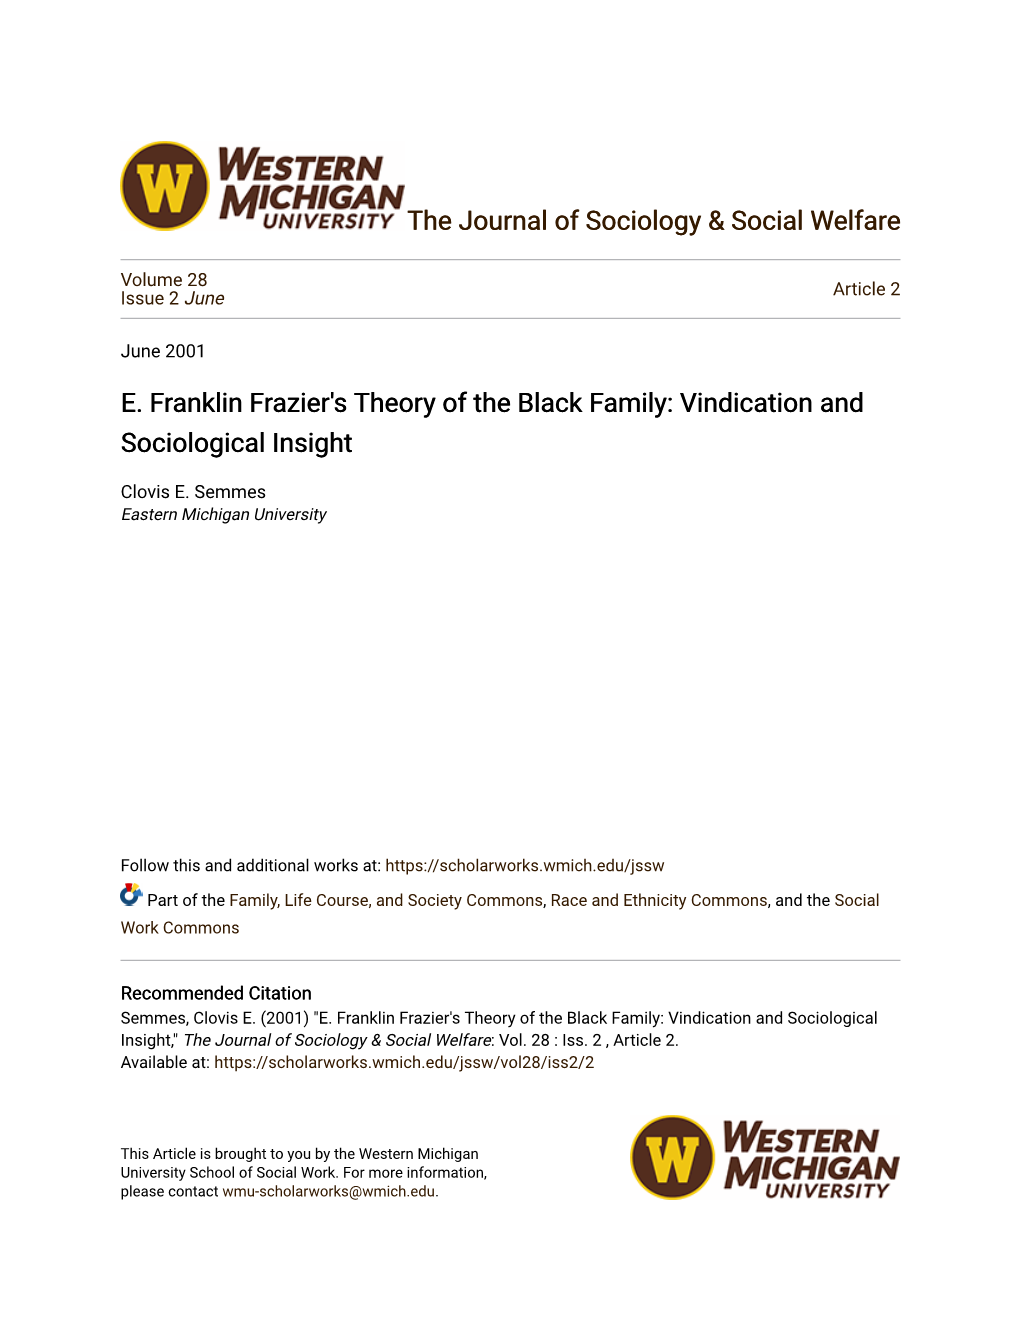 E. Franklin Frazier's Theory of the Black Family: Vindication and Sociological Insight